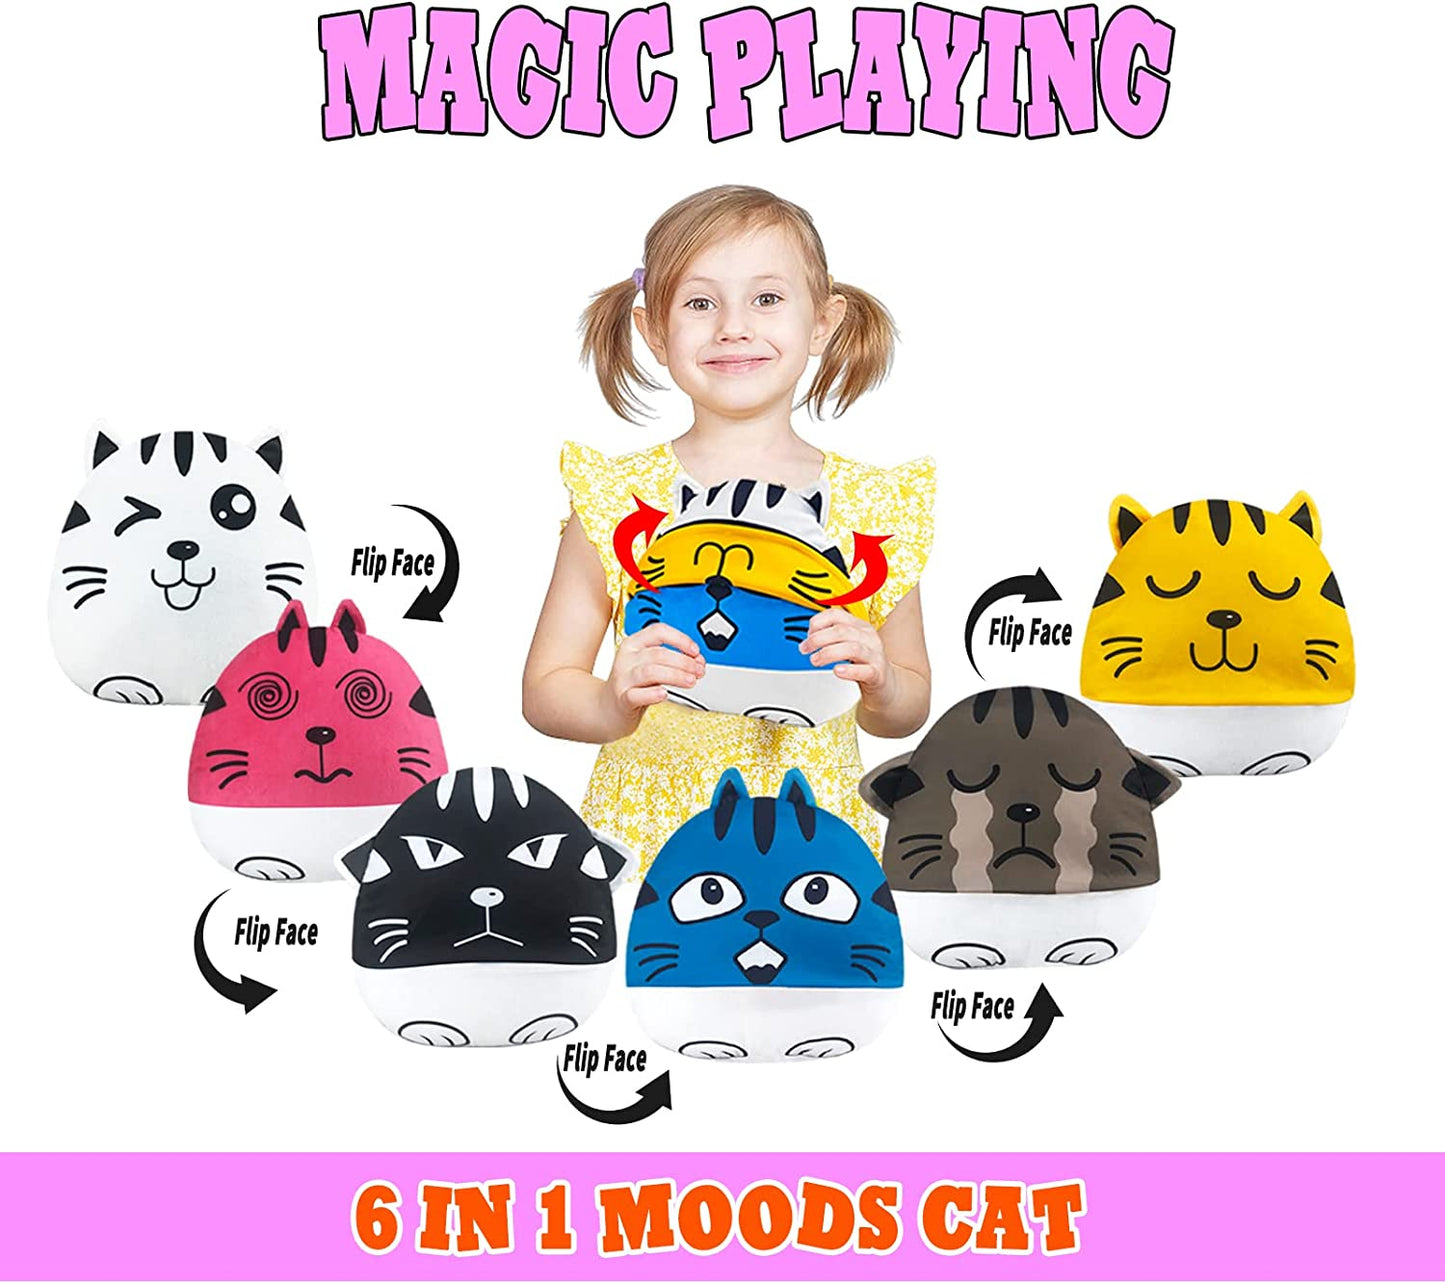 The Original Six Faces Cat Plushie Toys- Sensory Fidget Toy for Stress Relief- A Soft Stuffed Animal Plush Toy That Understands Your Kid's Mood Better!